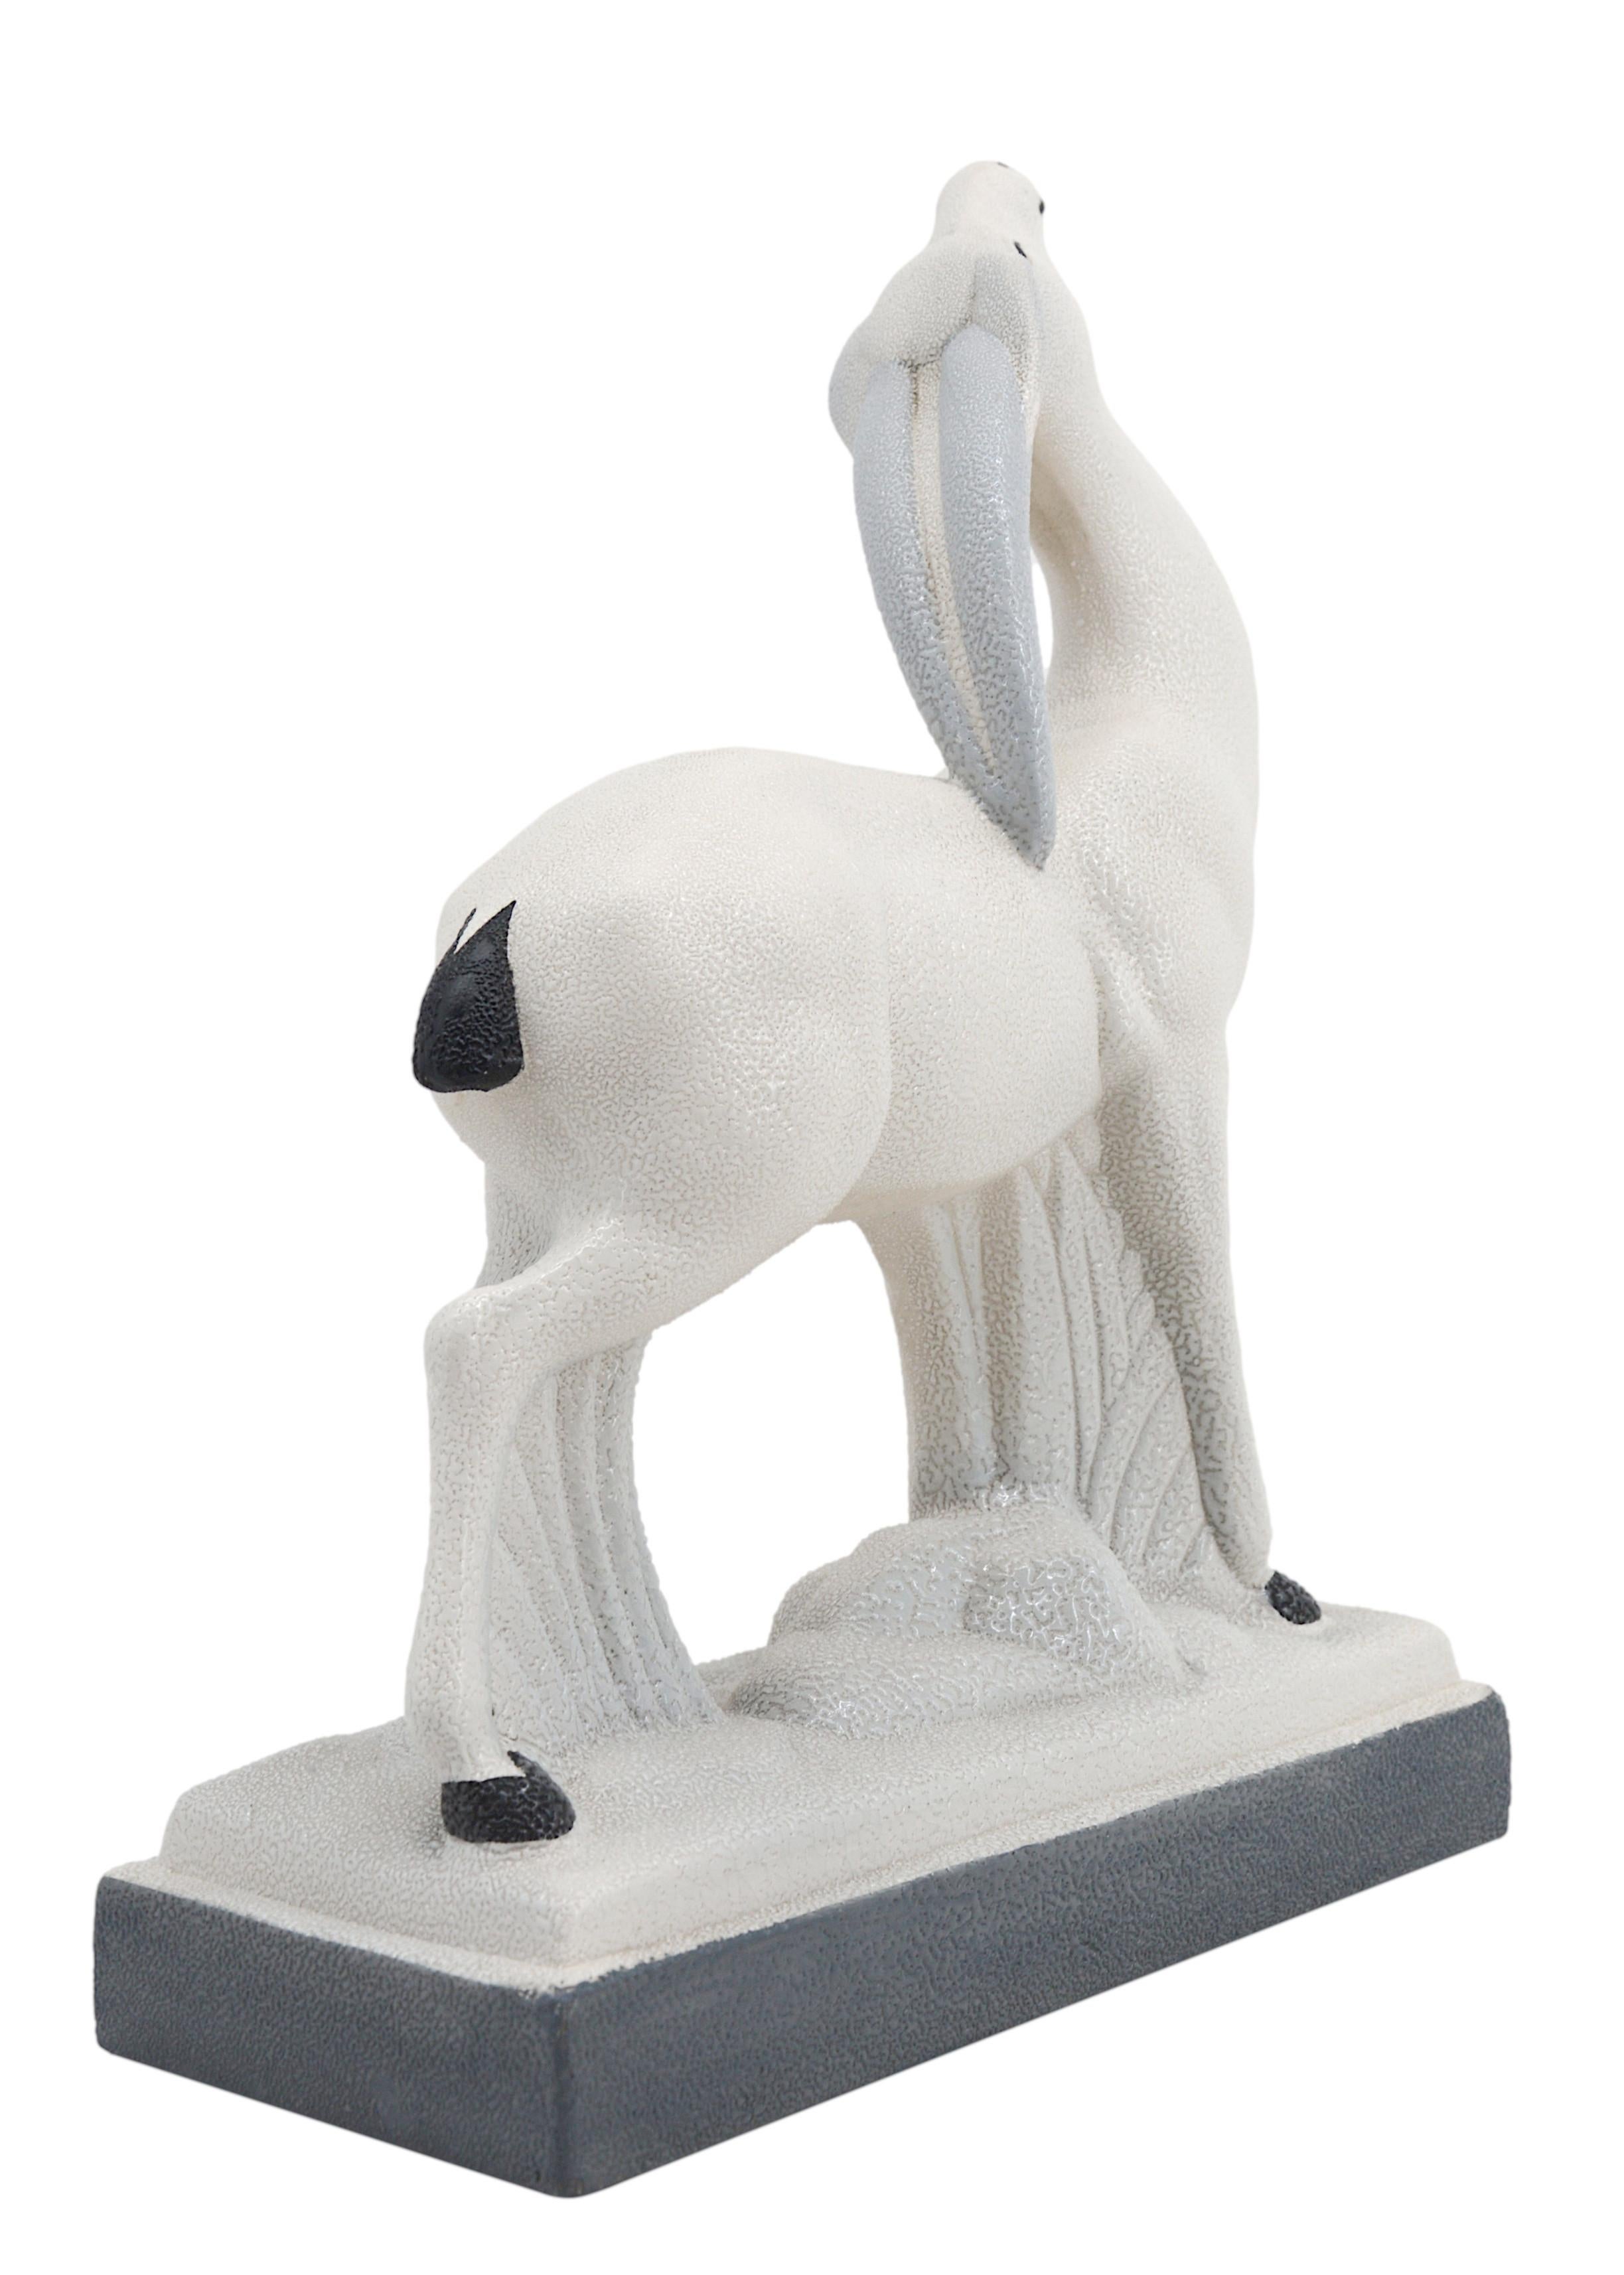 Charles Lemanceau French Art Deco Ceramic Antelope, 1930s For Sale 1